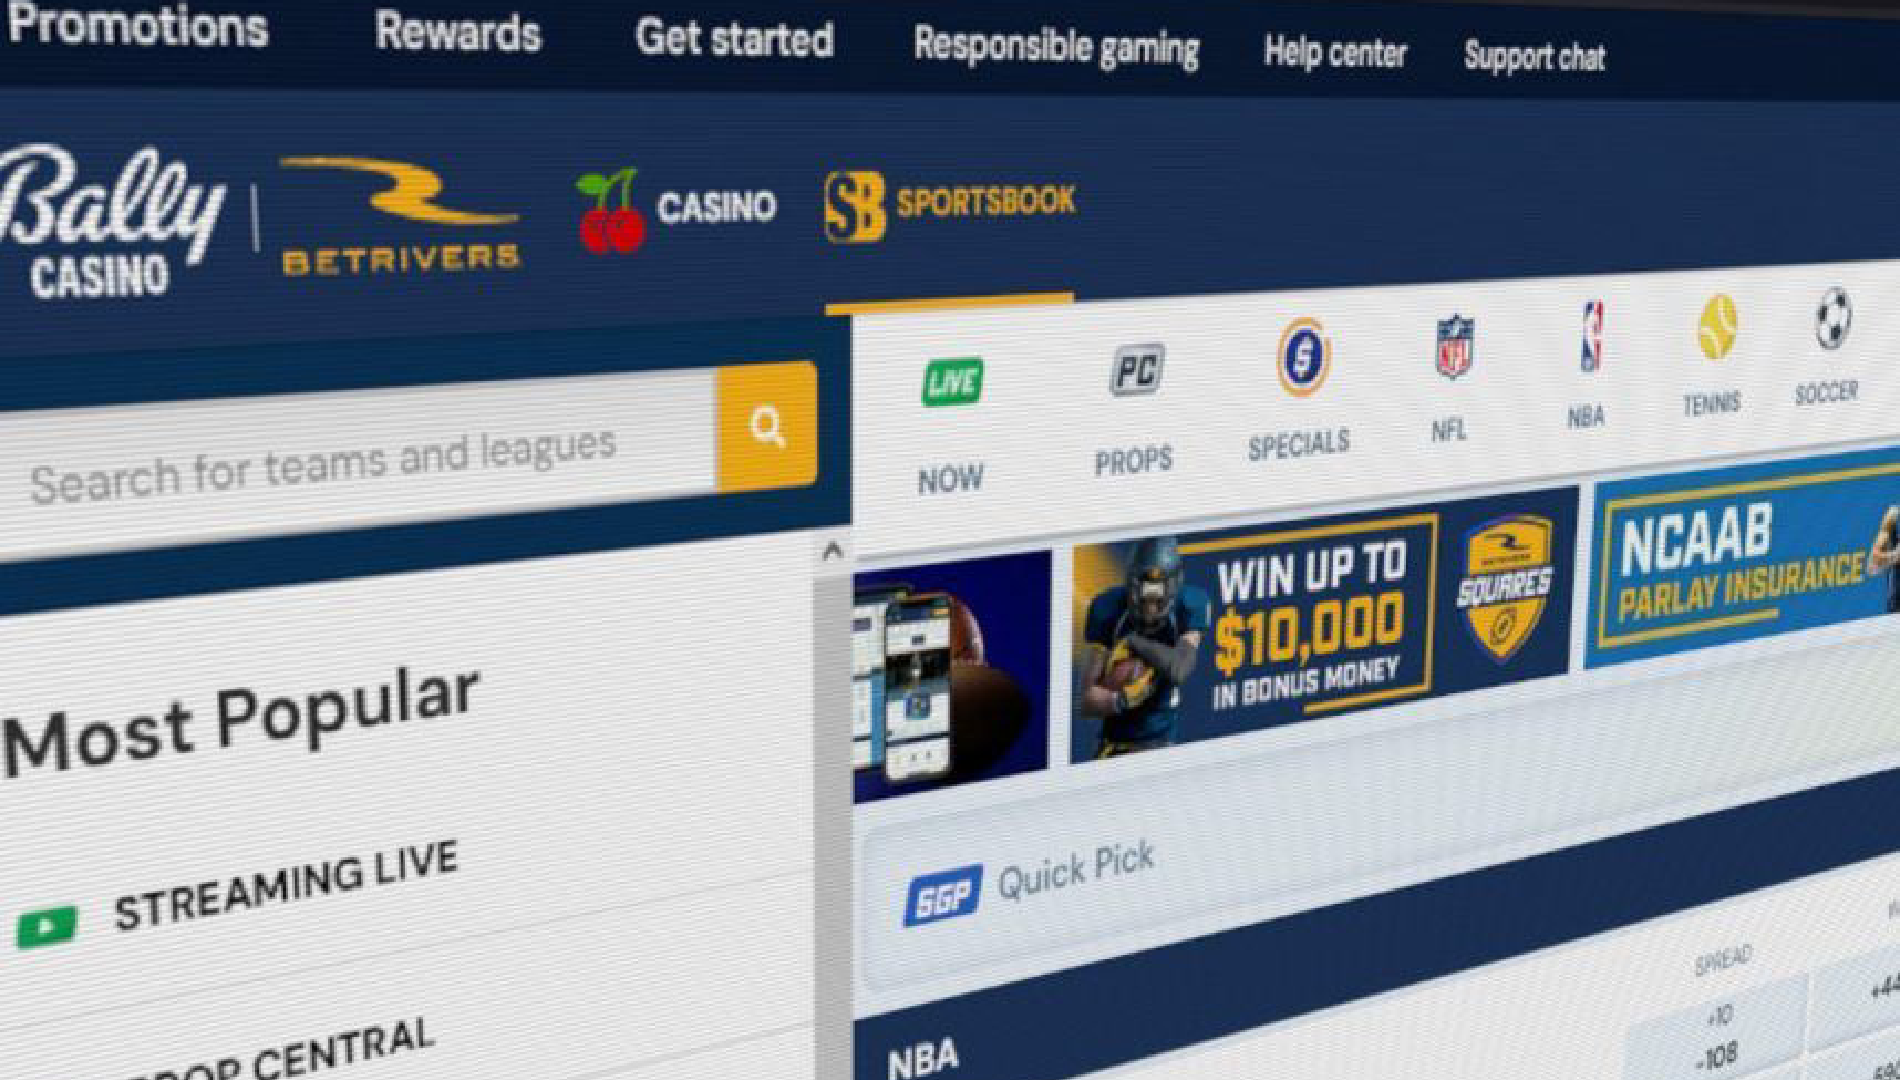 Delaware Online Sports Betting Market Could Expand With Additional Operators